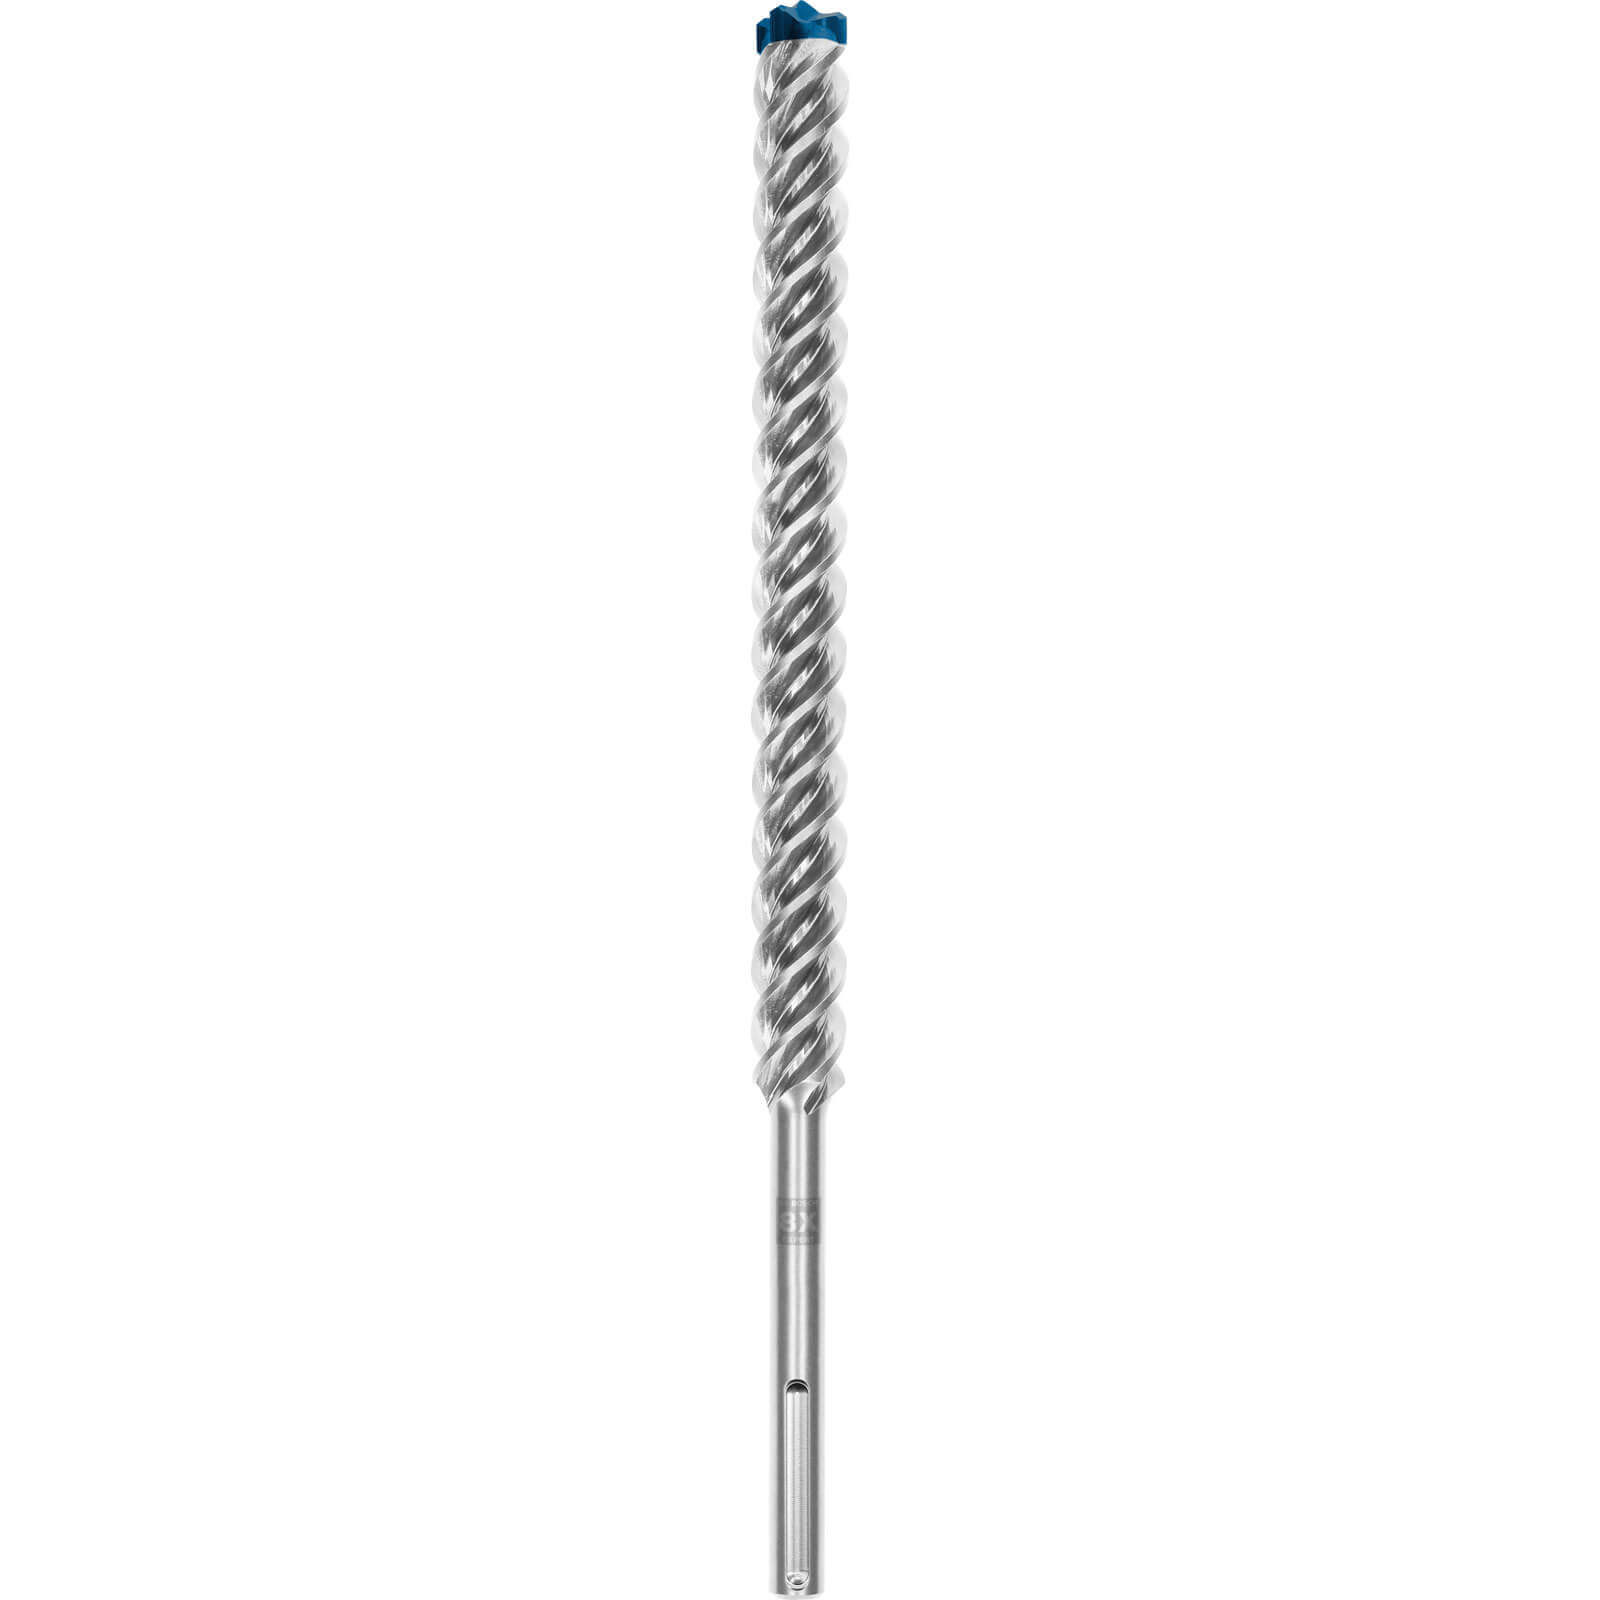 Image of Bosch Expert SDS MAX 8X Concrete 4 Cutter Carbide Head SDS Max Drill Bit 28mm 520mm Pack of 1